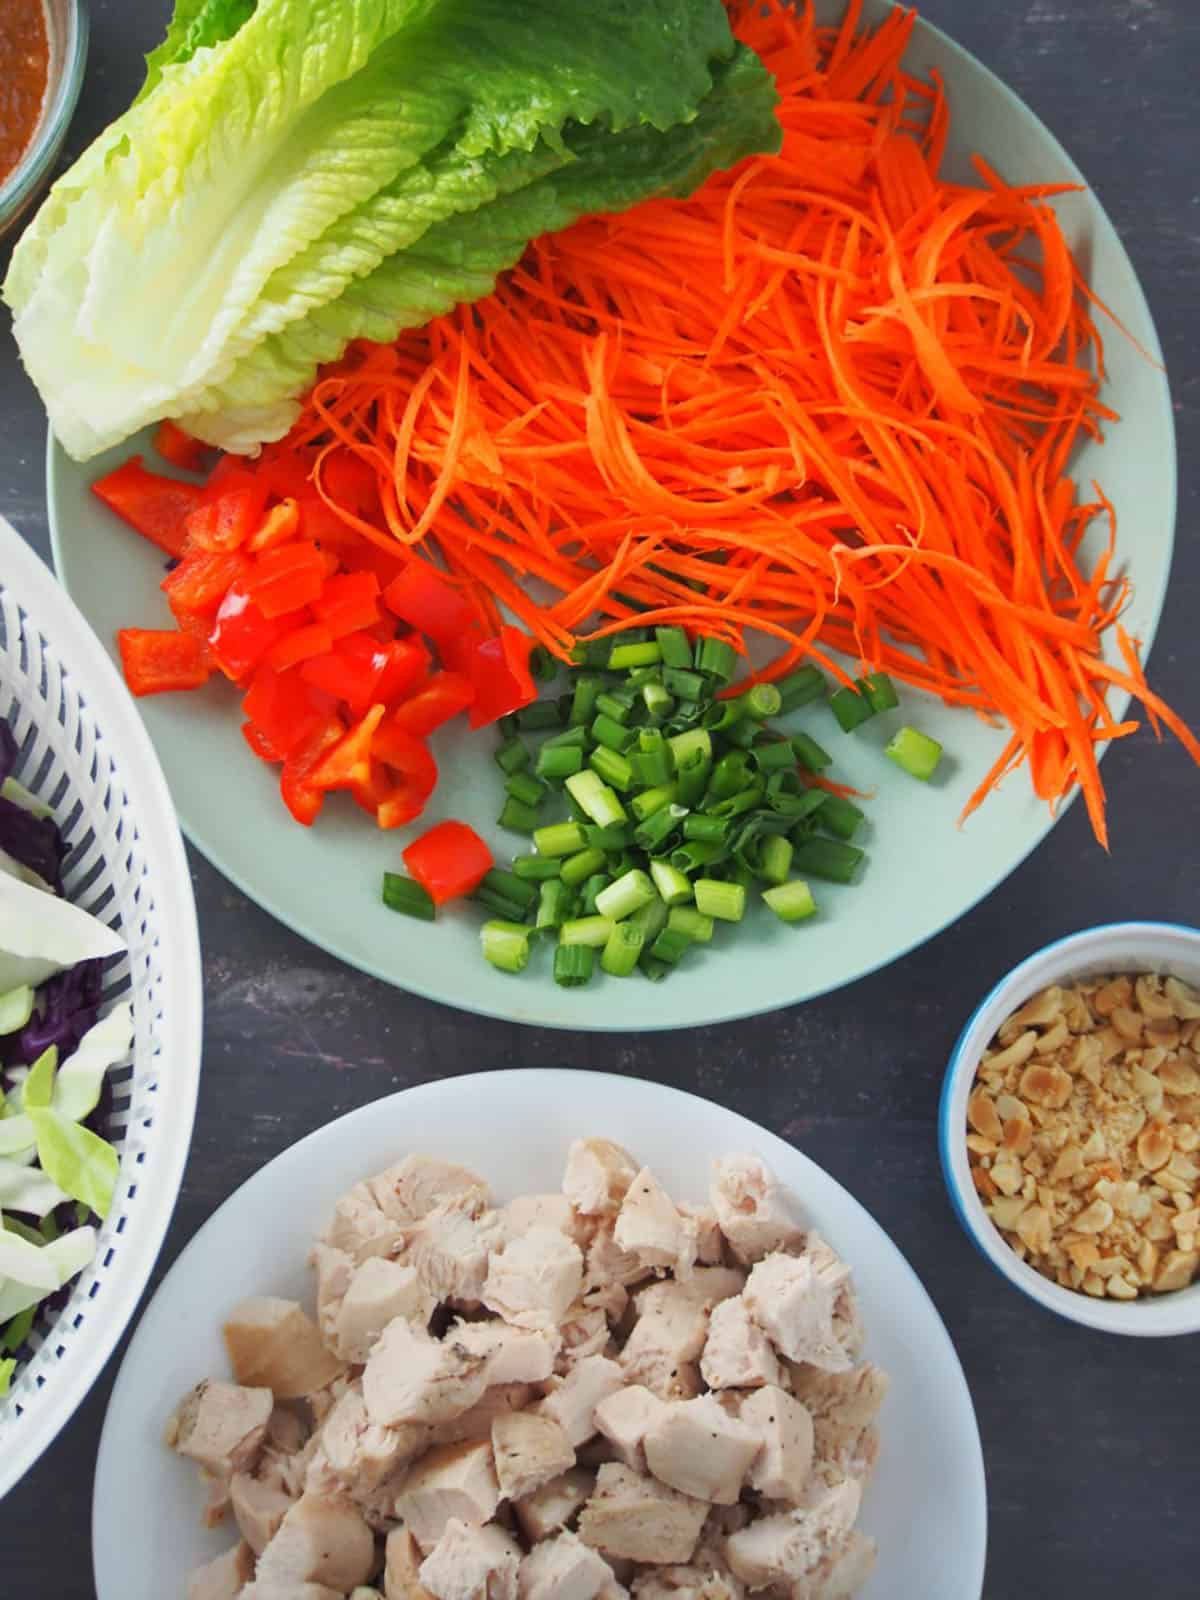 shredded carrots, diced red bell peppers, romaine lettuce, chicken, chopped cabbage, chopped green onions, peanuts